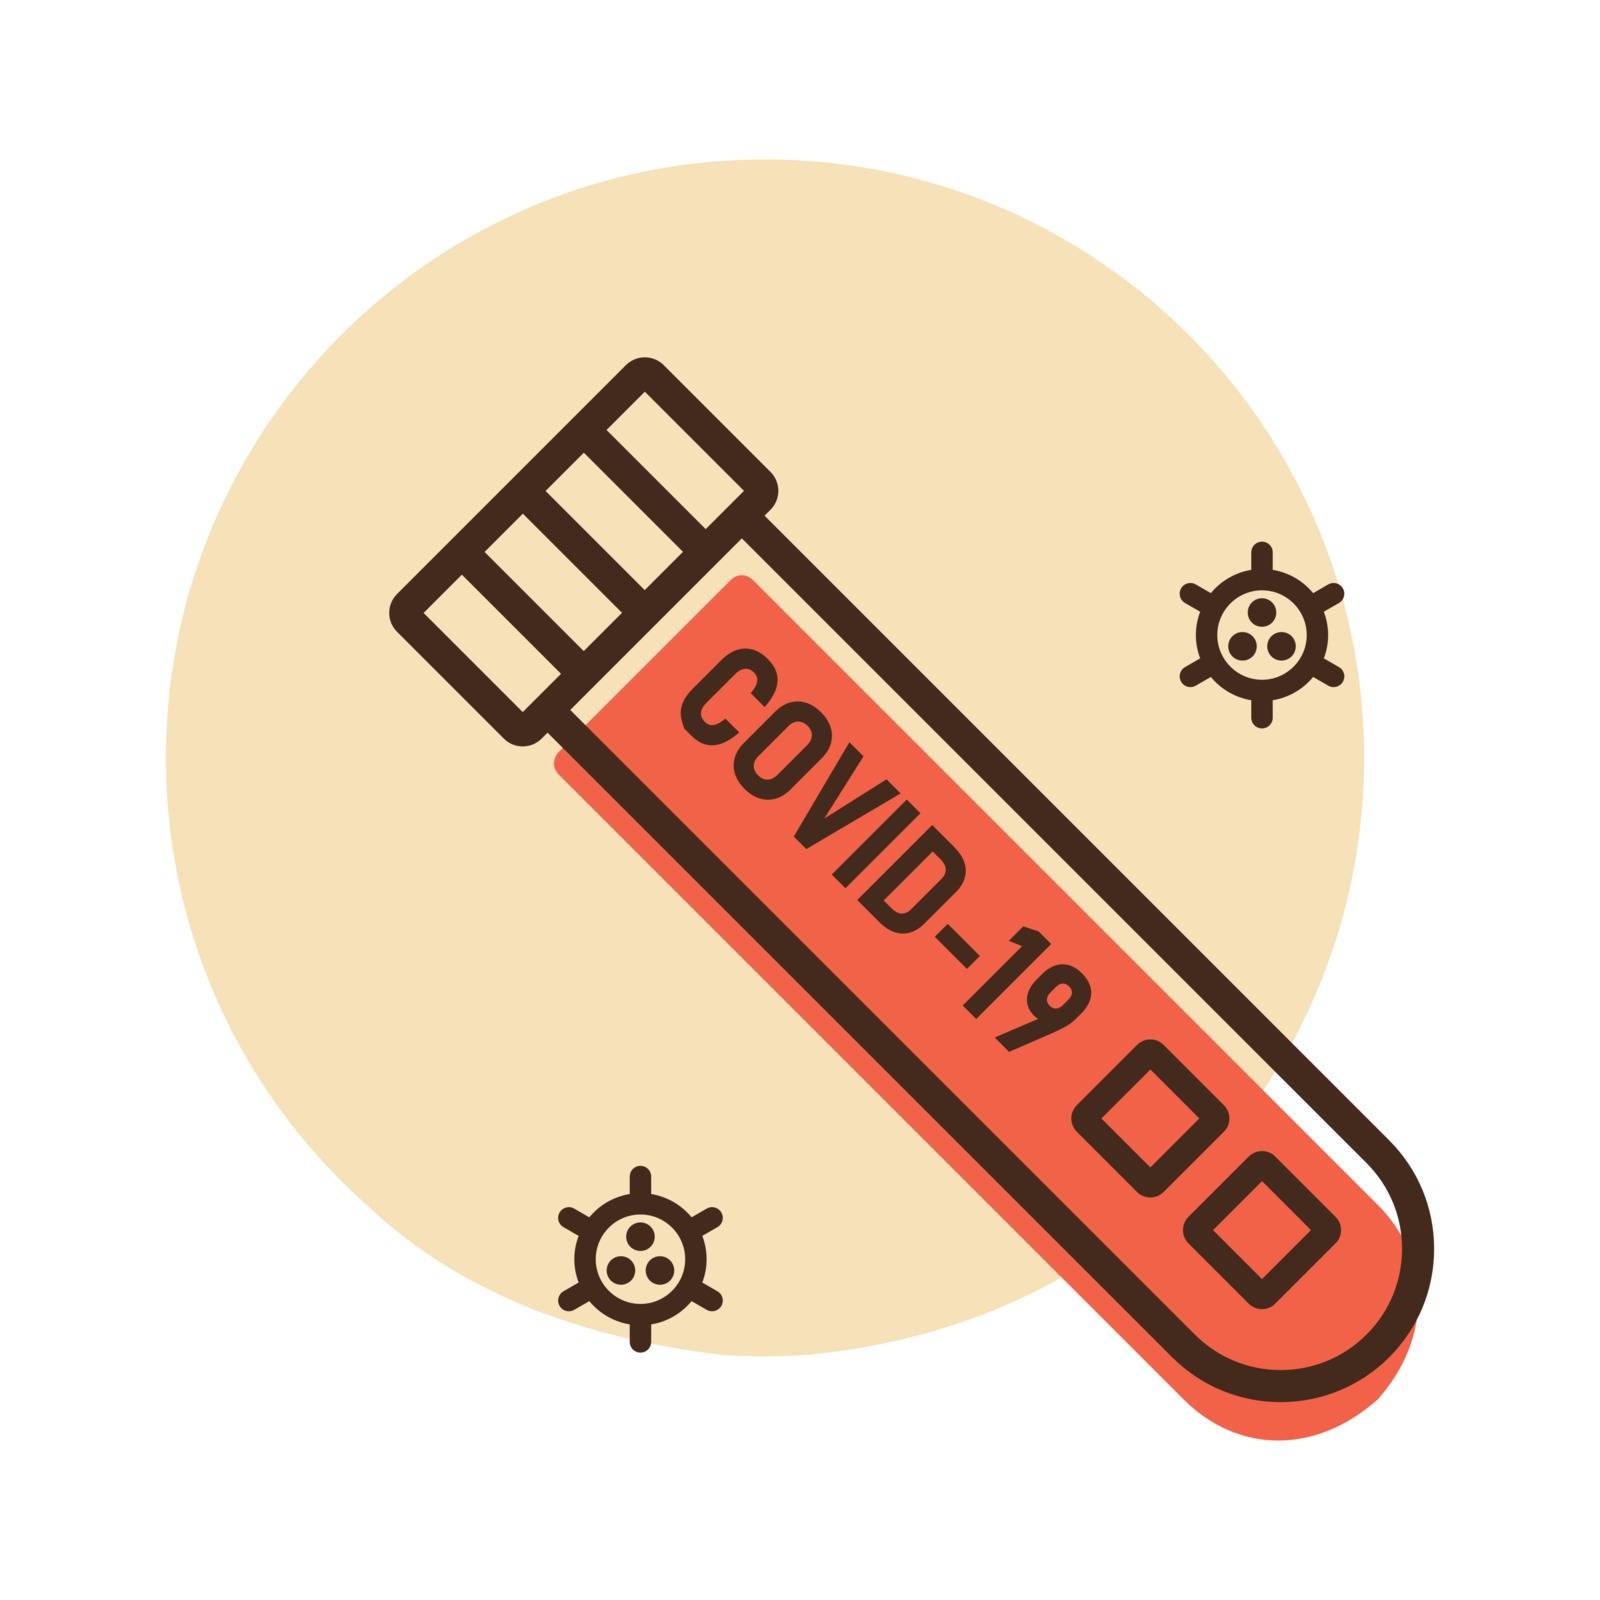 Coronavirus blood test tube vector icon. Medical sign. Graph symbol for medical web site and apps design, logo, app, UI